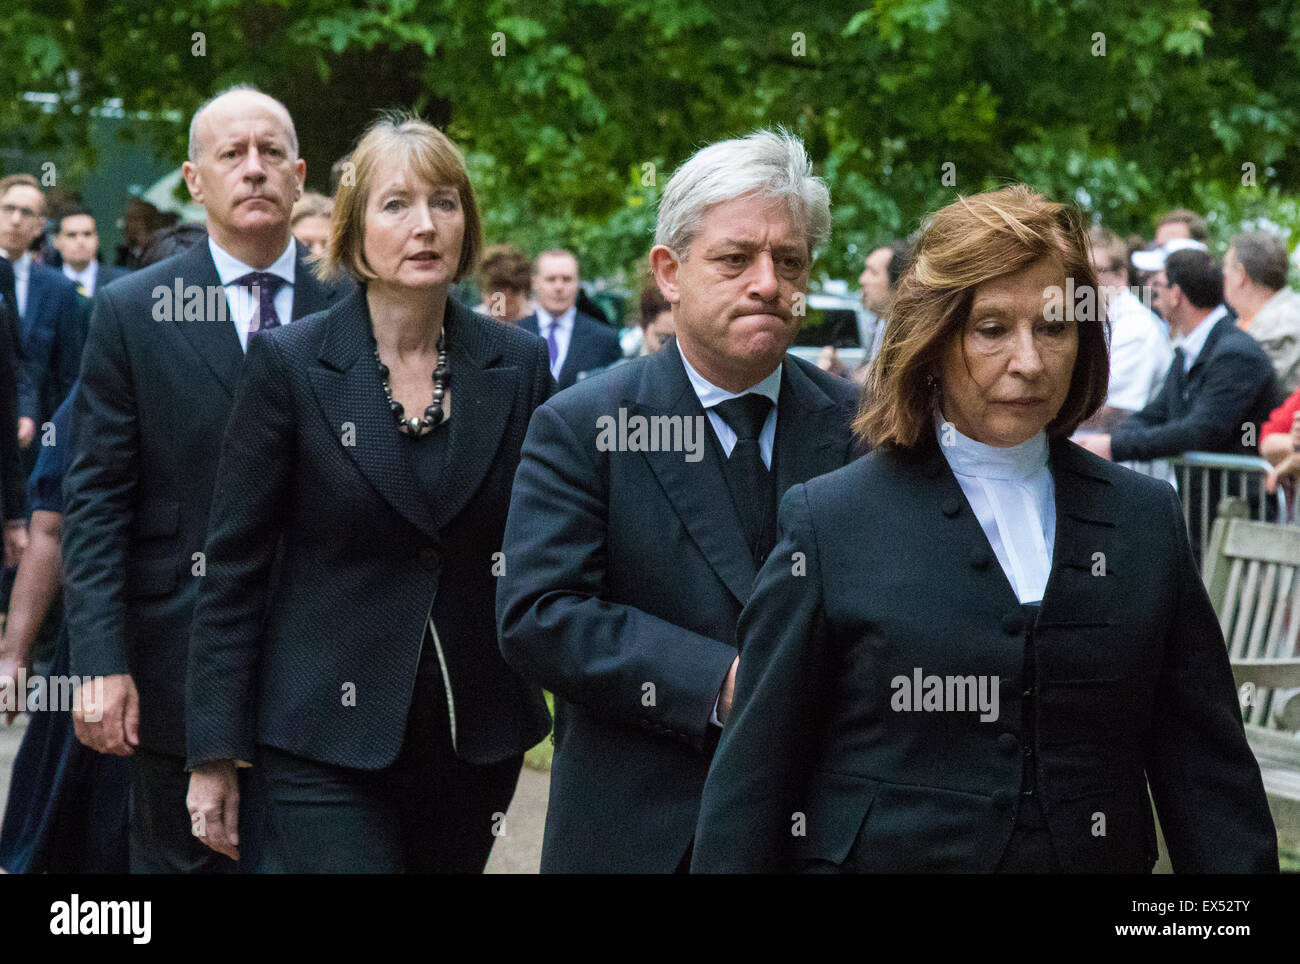 Hyde Park, London, July7th 2015. The Mayor of London Boris Johnson and other senior political figures, the Commissioners for transport and policing in the capital, as well as senior representatives of the emergency services lay wreaths at the 7/7 memorial in Hyde Park. PICTURED: Jules Pipe, Harriet Harman, John Bercow and Baroness D'Souza Credit:  Paul Davey/Alamy Live News Stock Photo